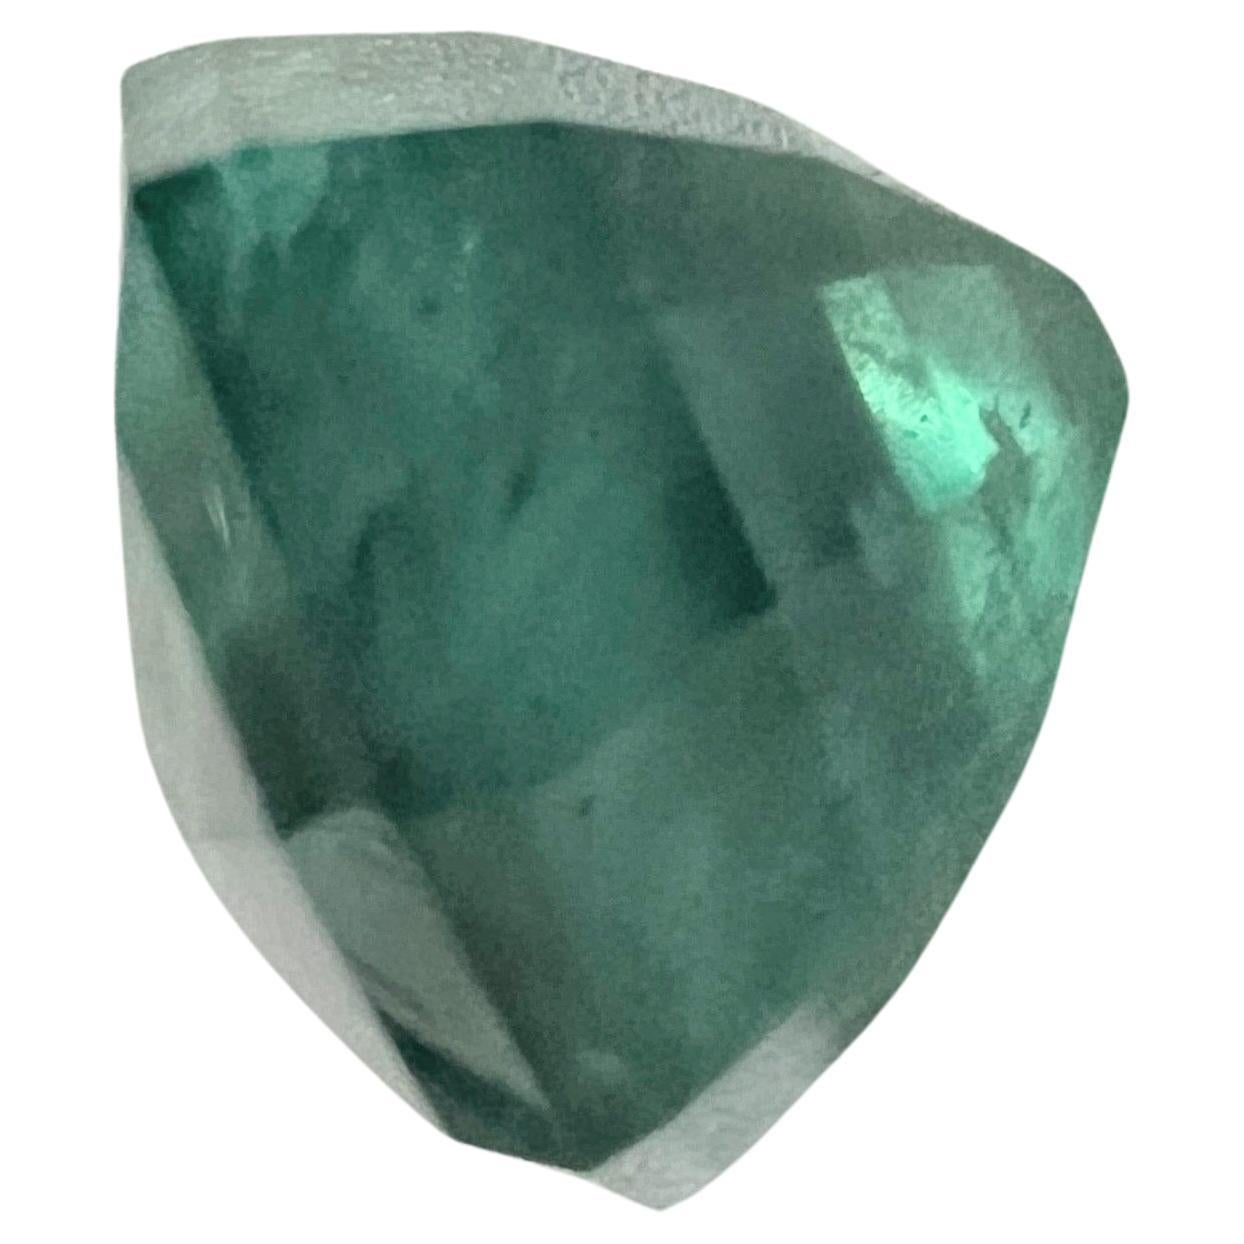 Artisan NO RESERVE 10.35ct Radiant Cut Natural NON-OILED  EMERALD Gemstone For Sale